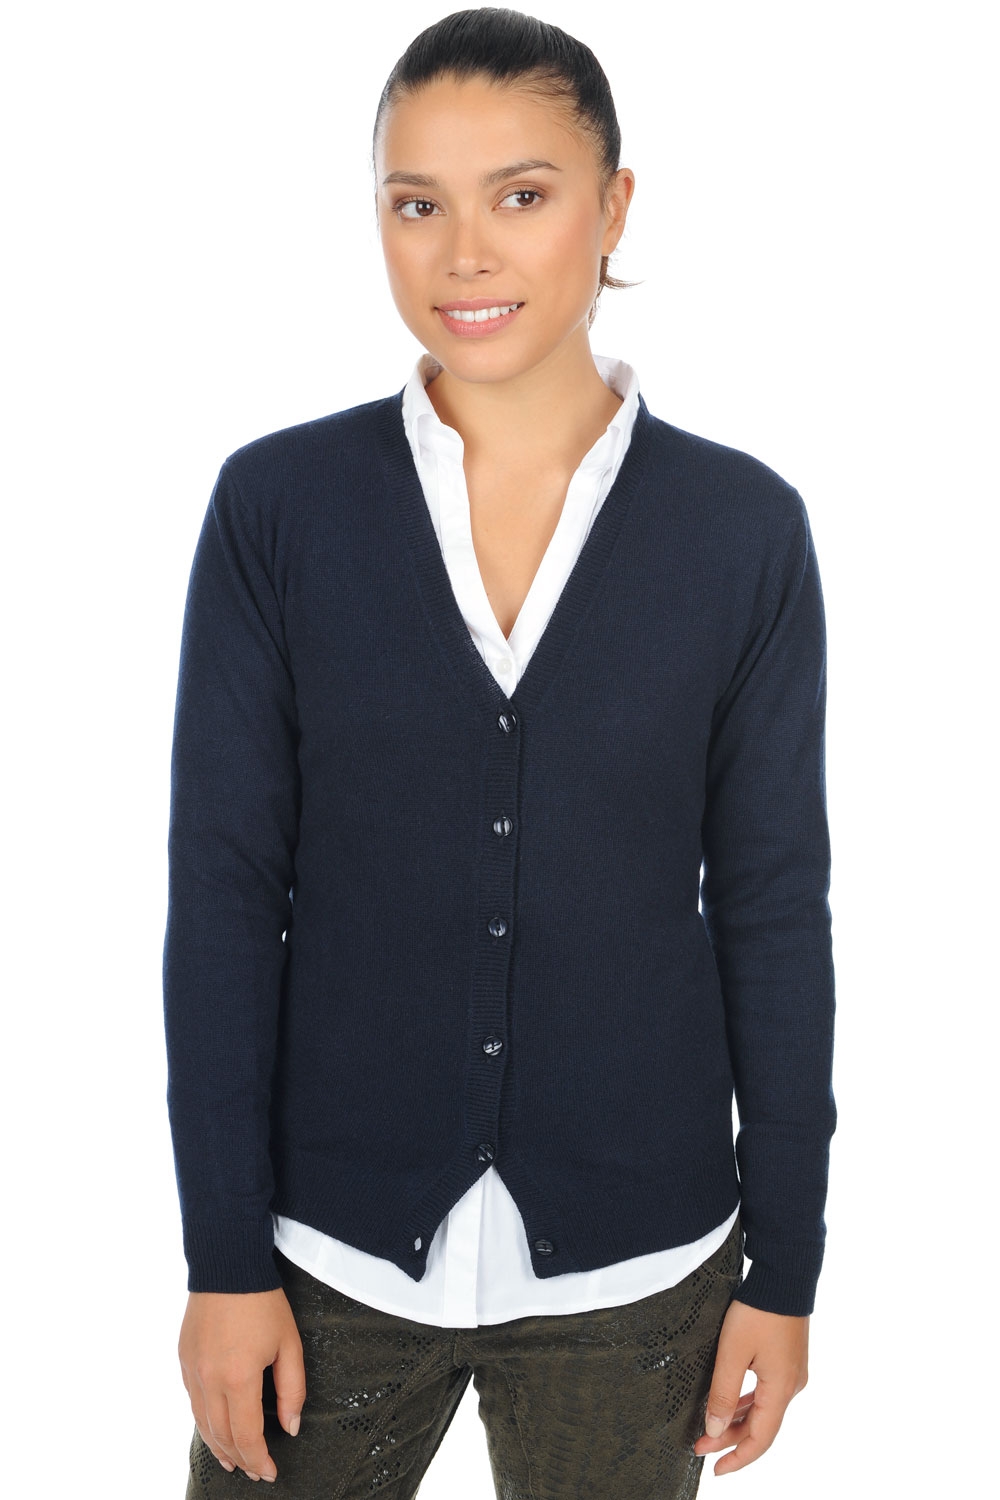 Cashmere ladies basic sweaters at low prices taline first dress blue s